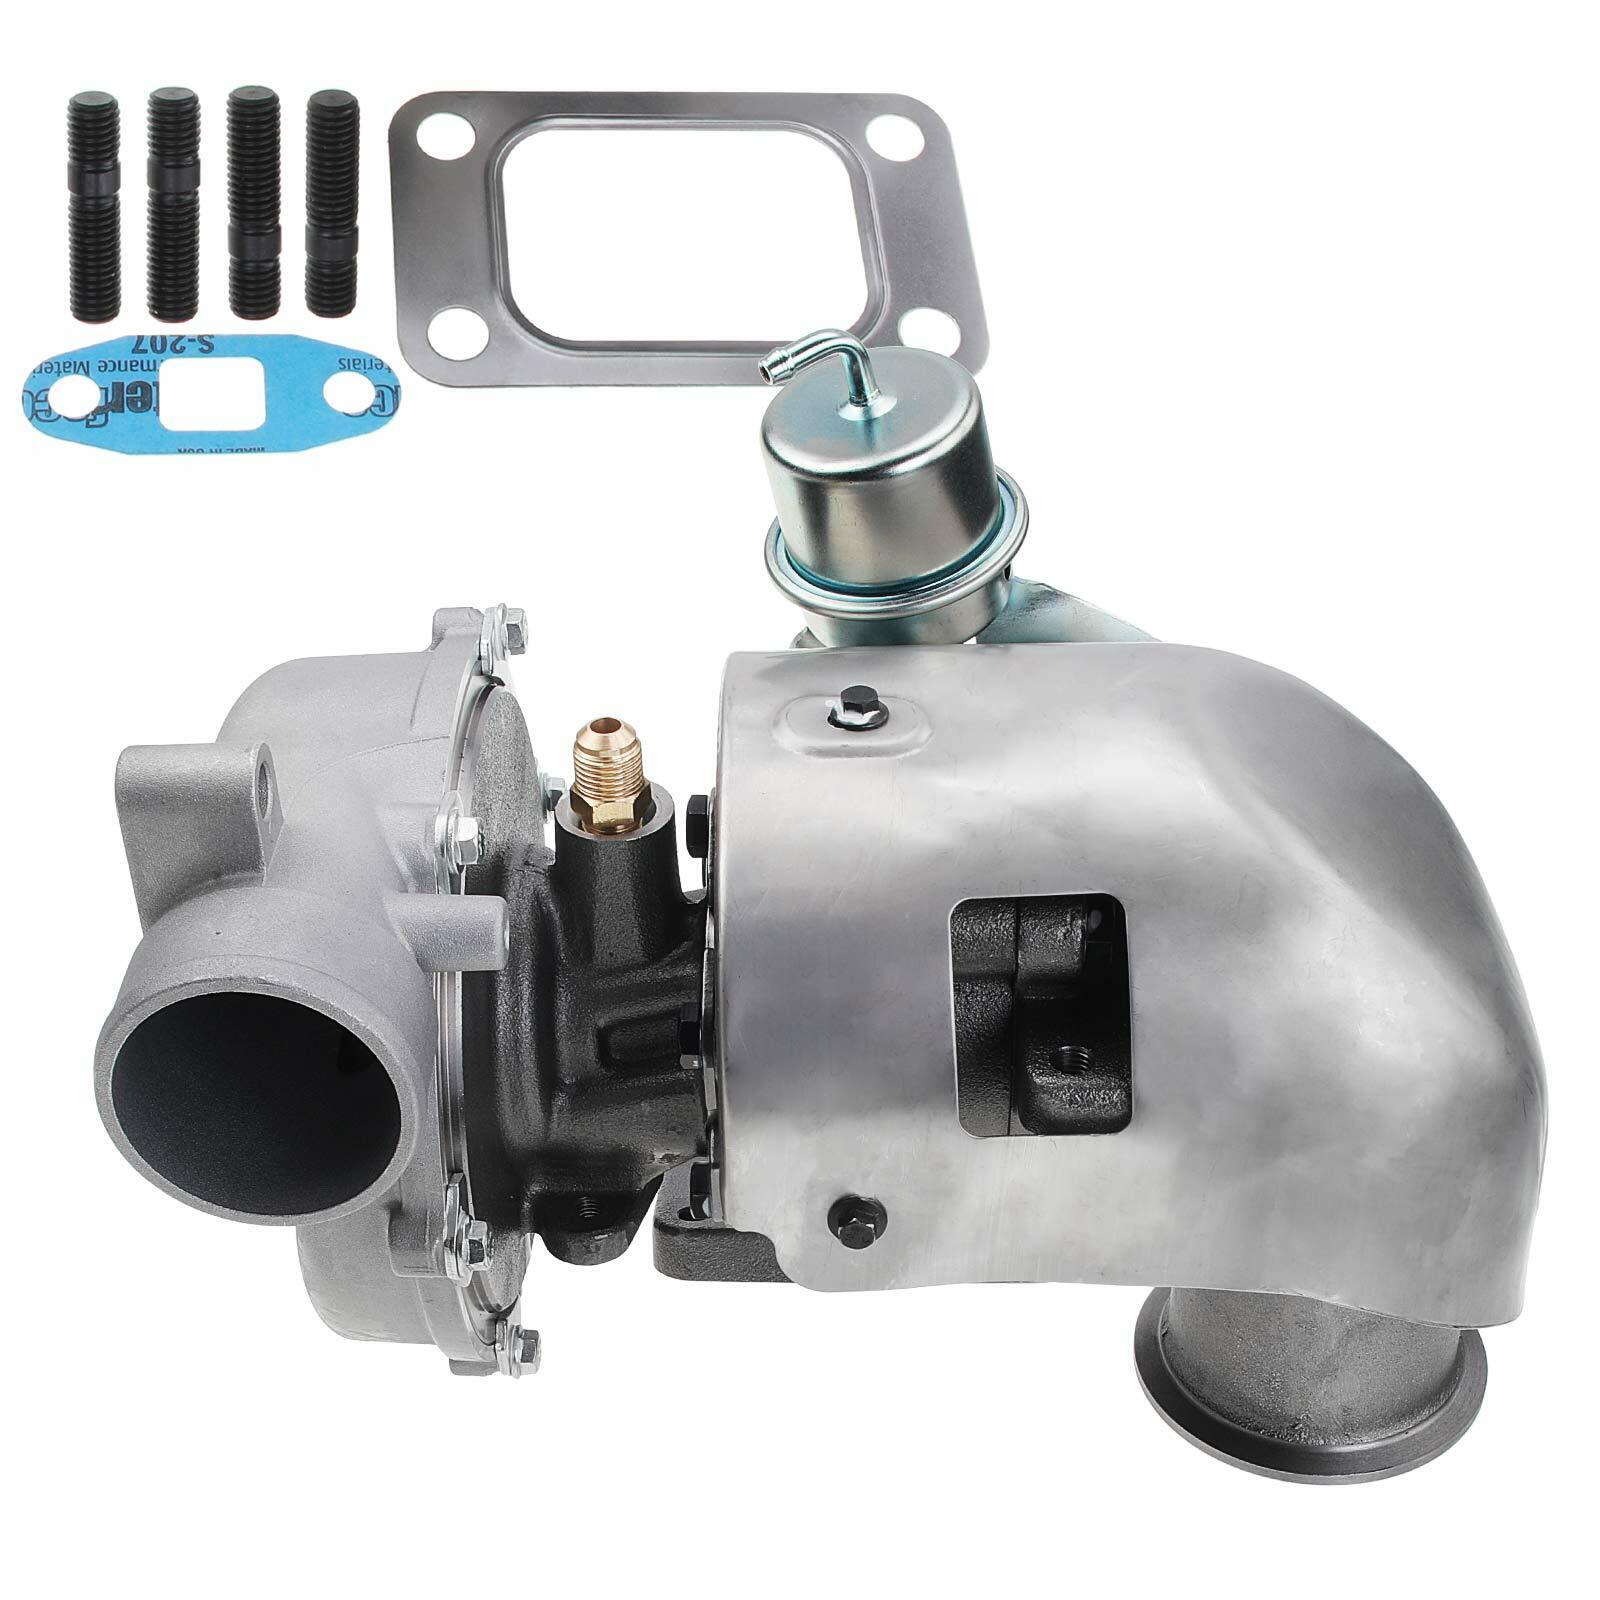 New GM8 Turbo Turbocharger For Chevy GMC Pickup Truck 97-02 6.5L Diesel 12552738